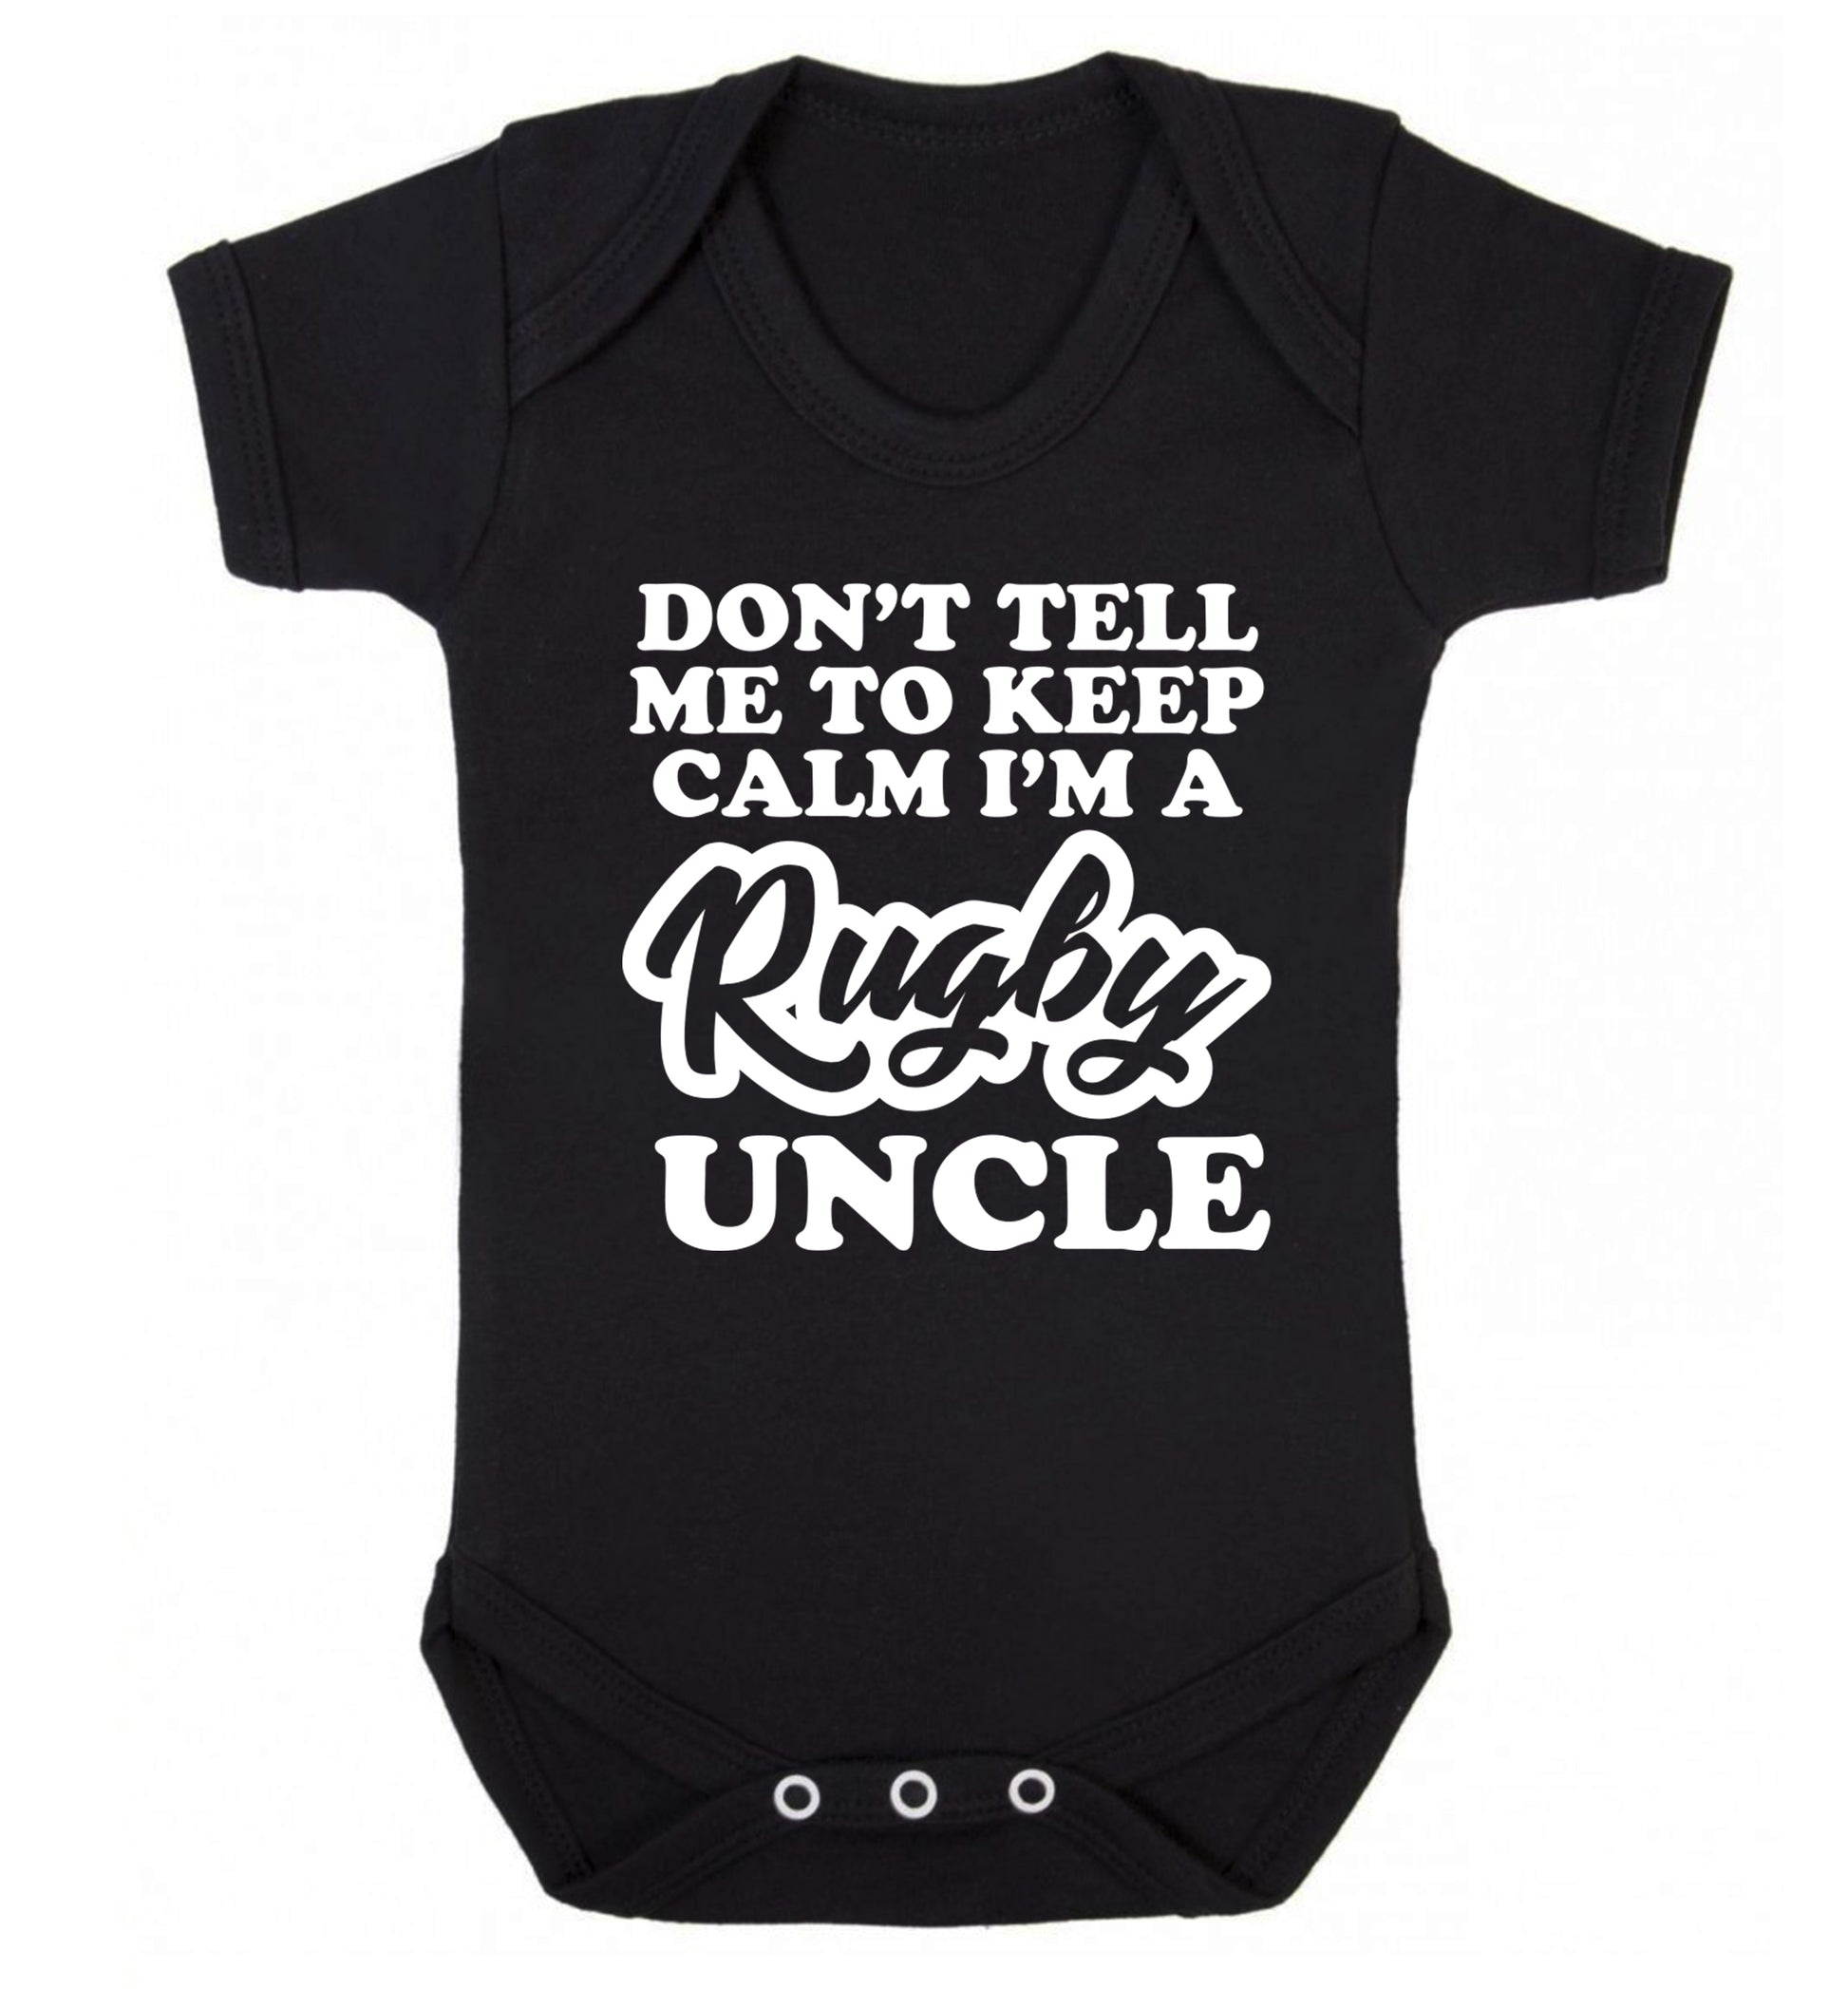 Don't tell me to keep calm I'm a rugby uncle Baby Vest black 18-24 months